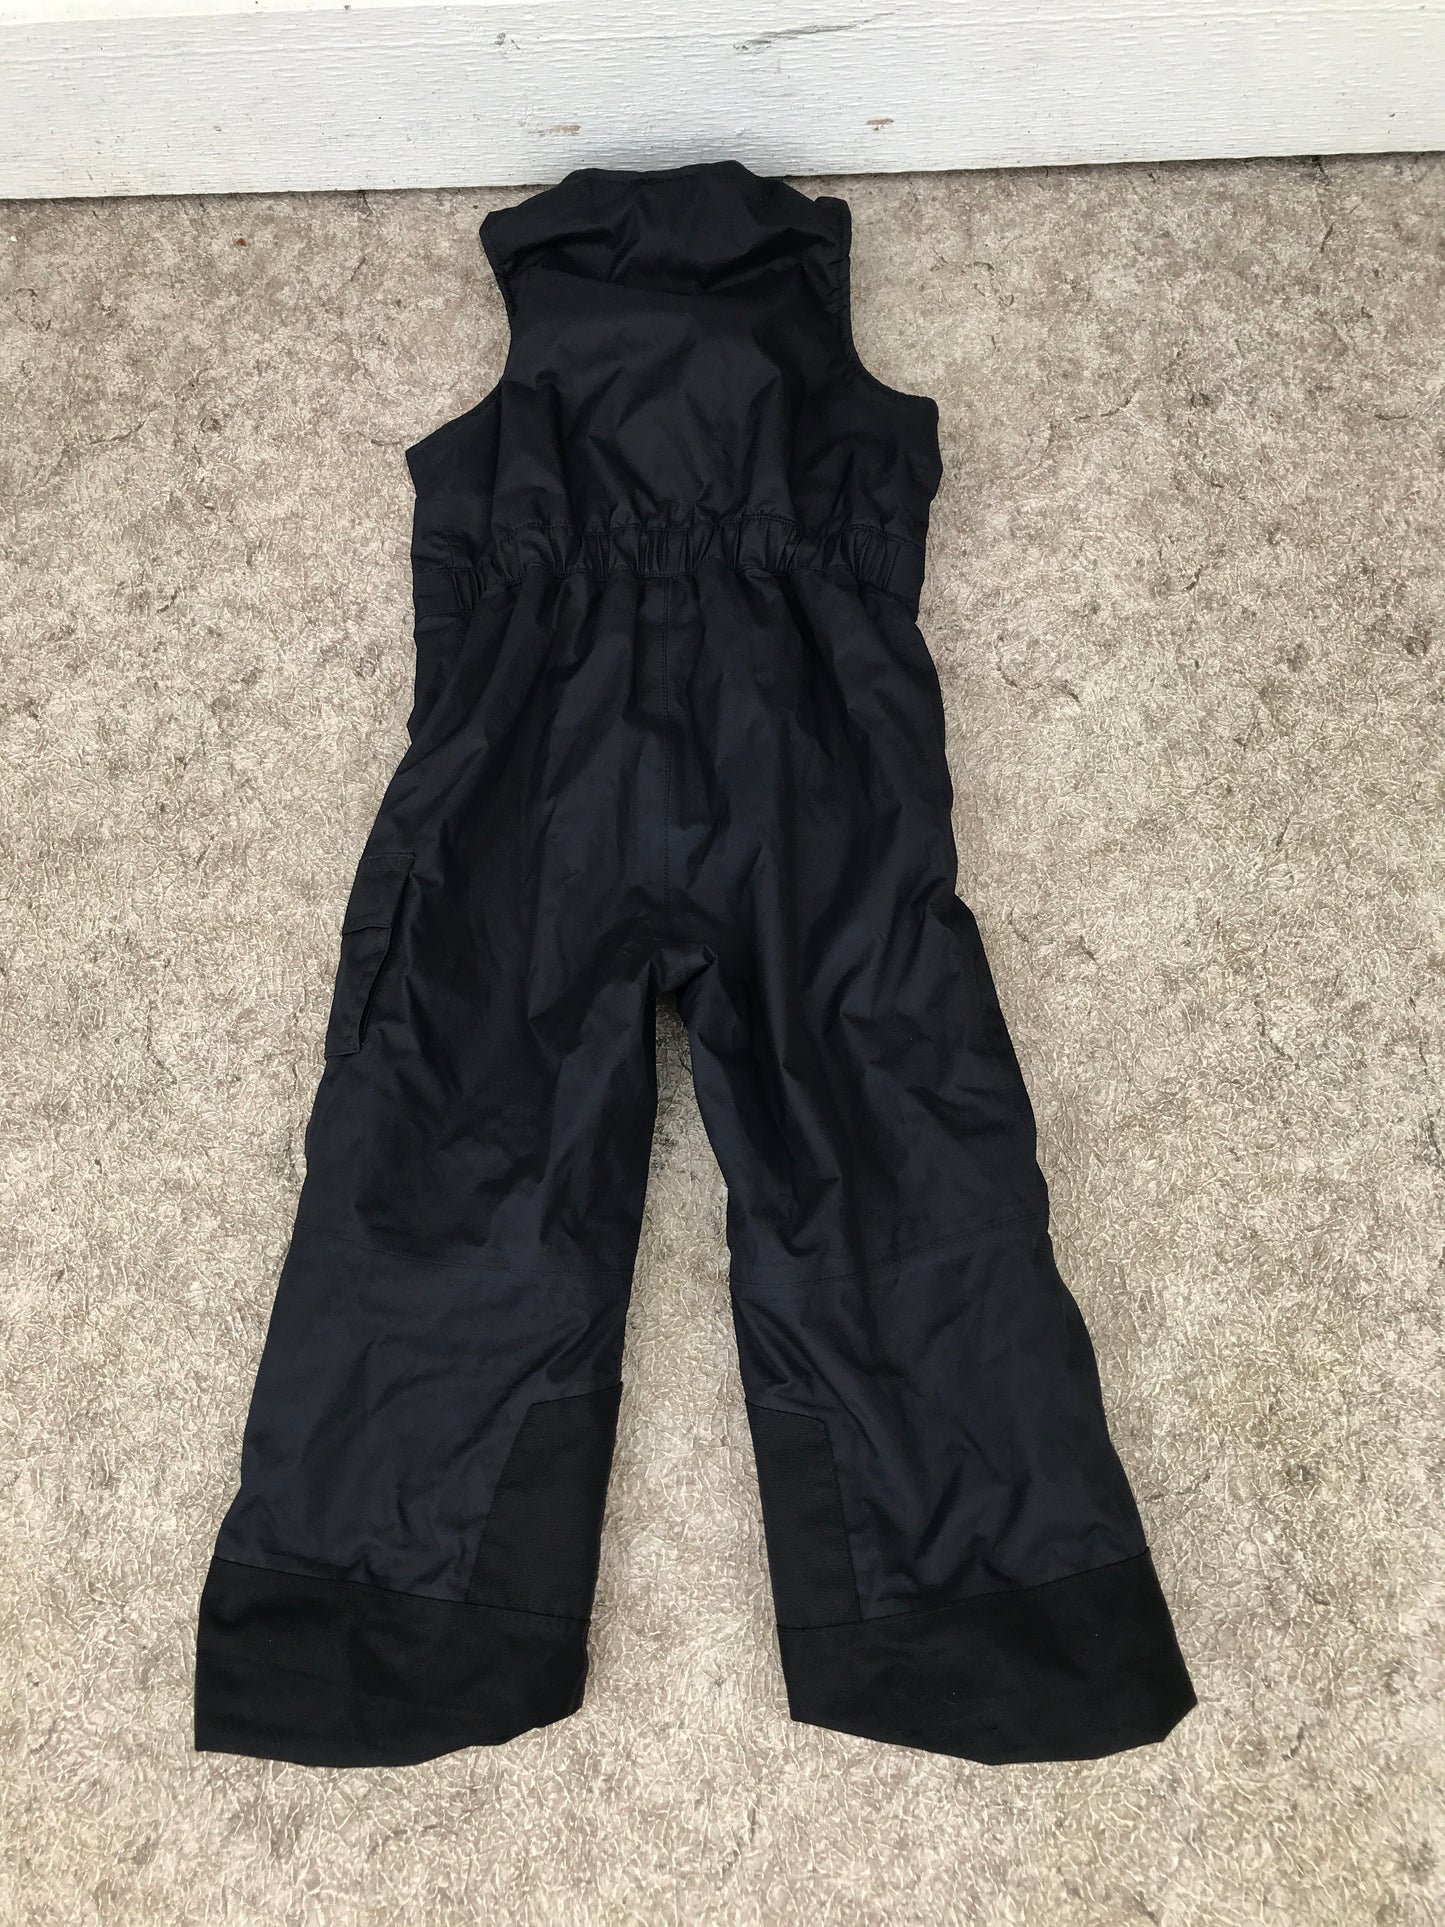 Snow Pants Child Size 3-4 The North Face Black With Bib Like New Outstanding Quality